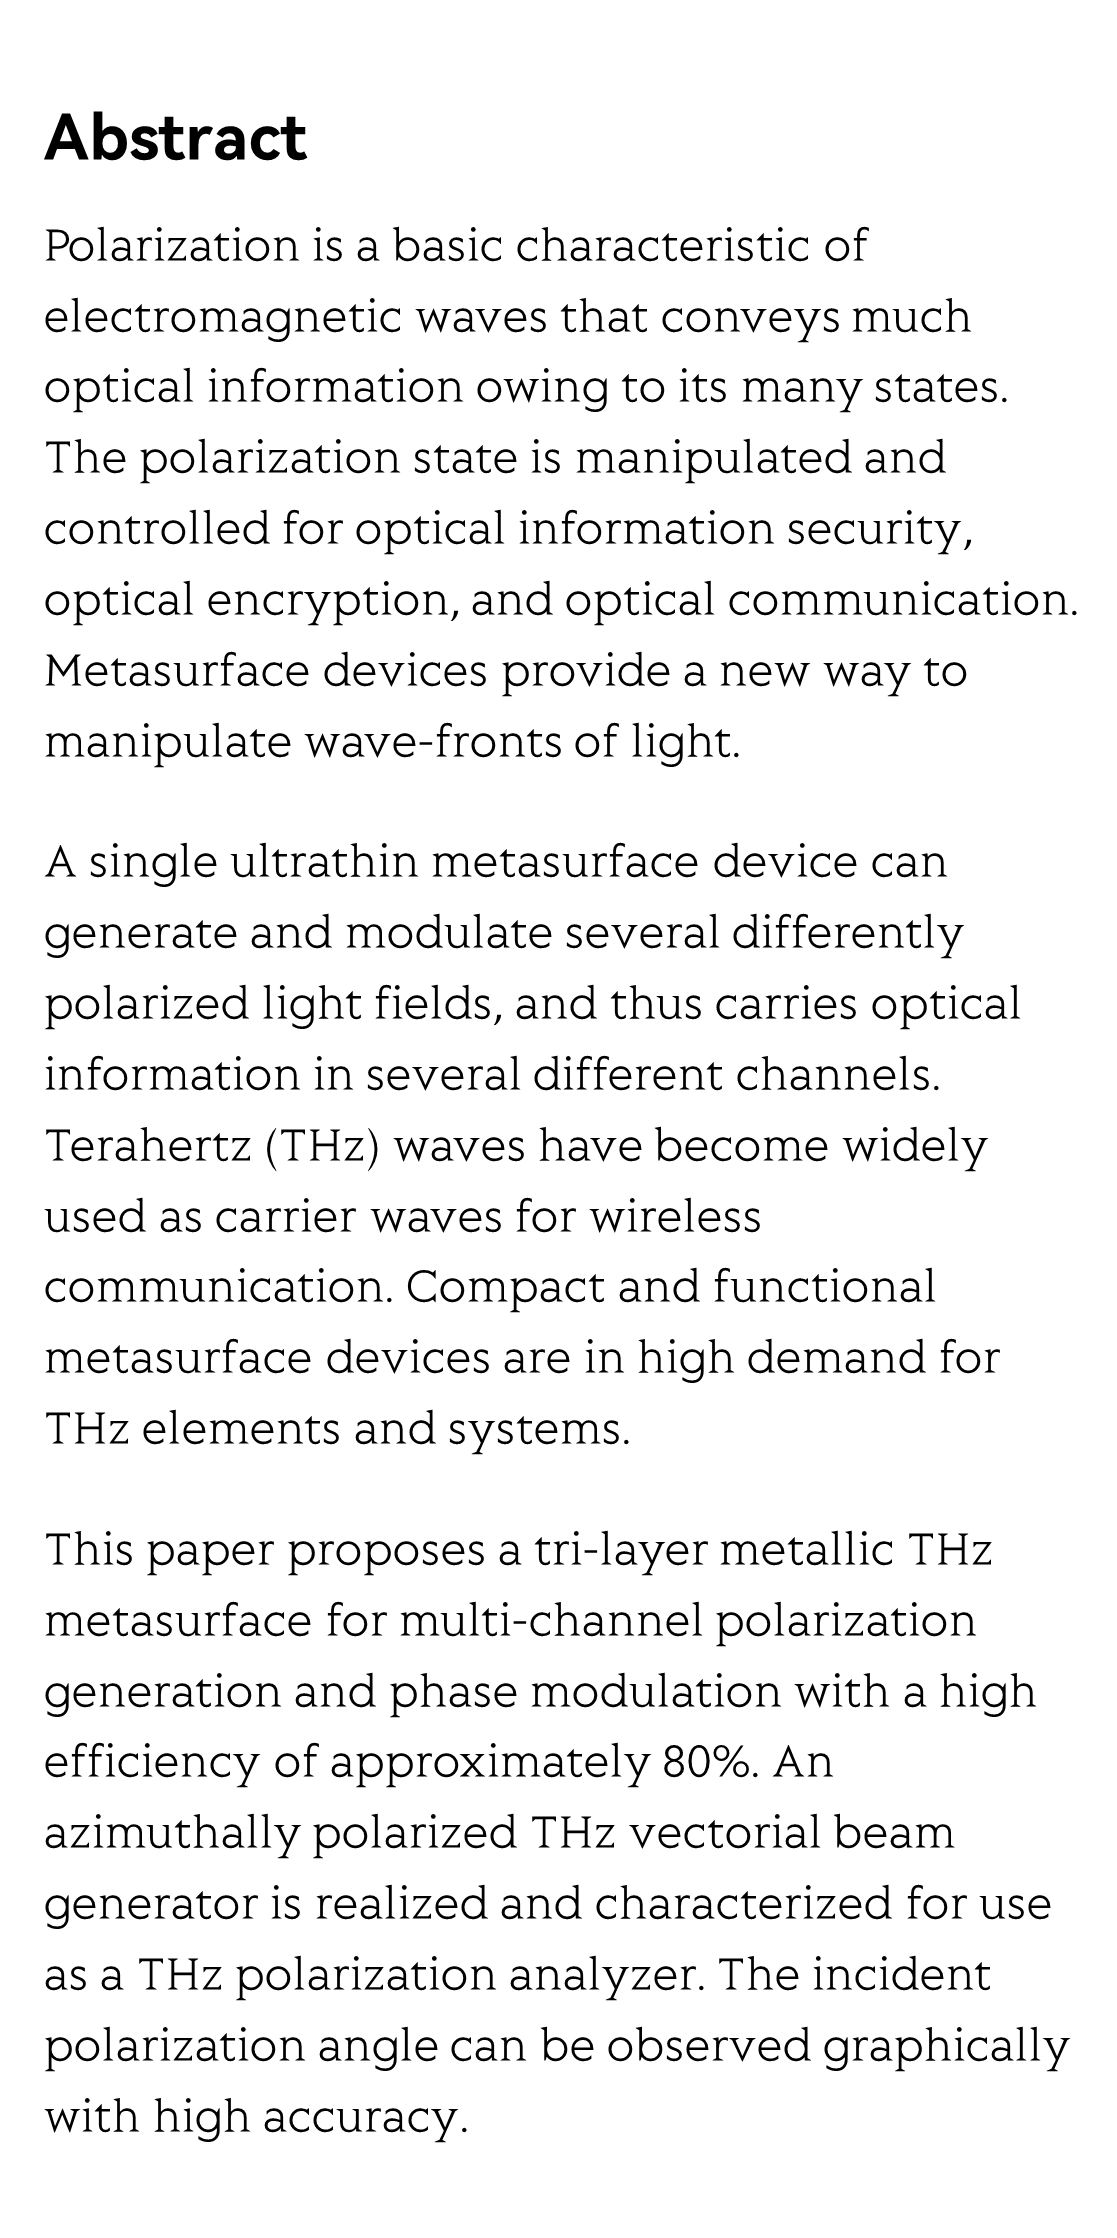 Highly efficient vectorial field manipulation using a transmitted tri-layer metasurface in the terahertz band_2